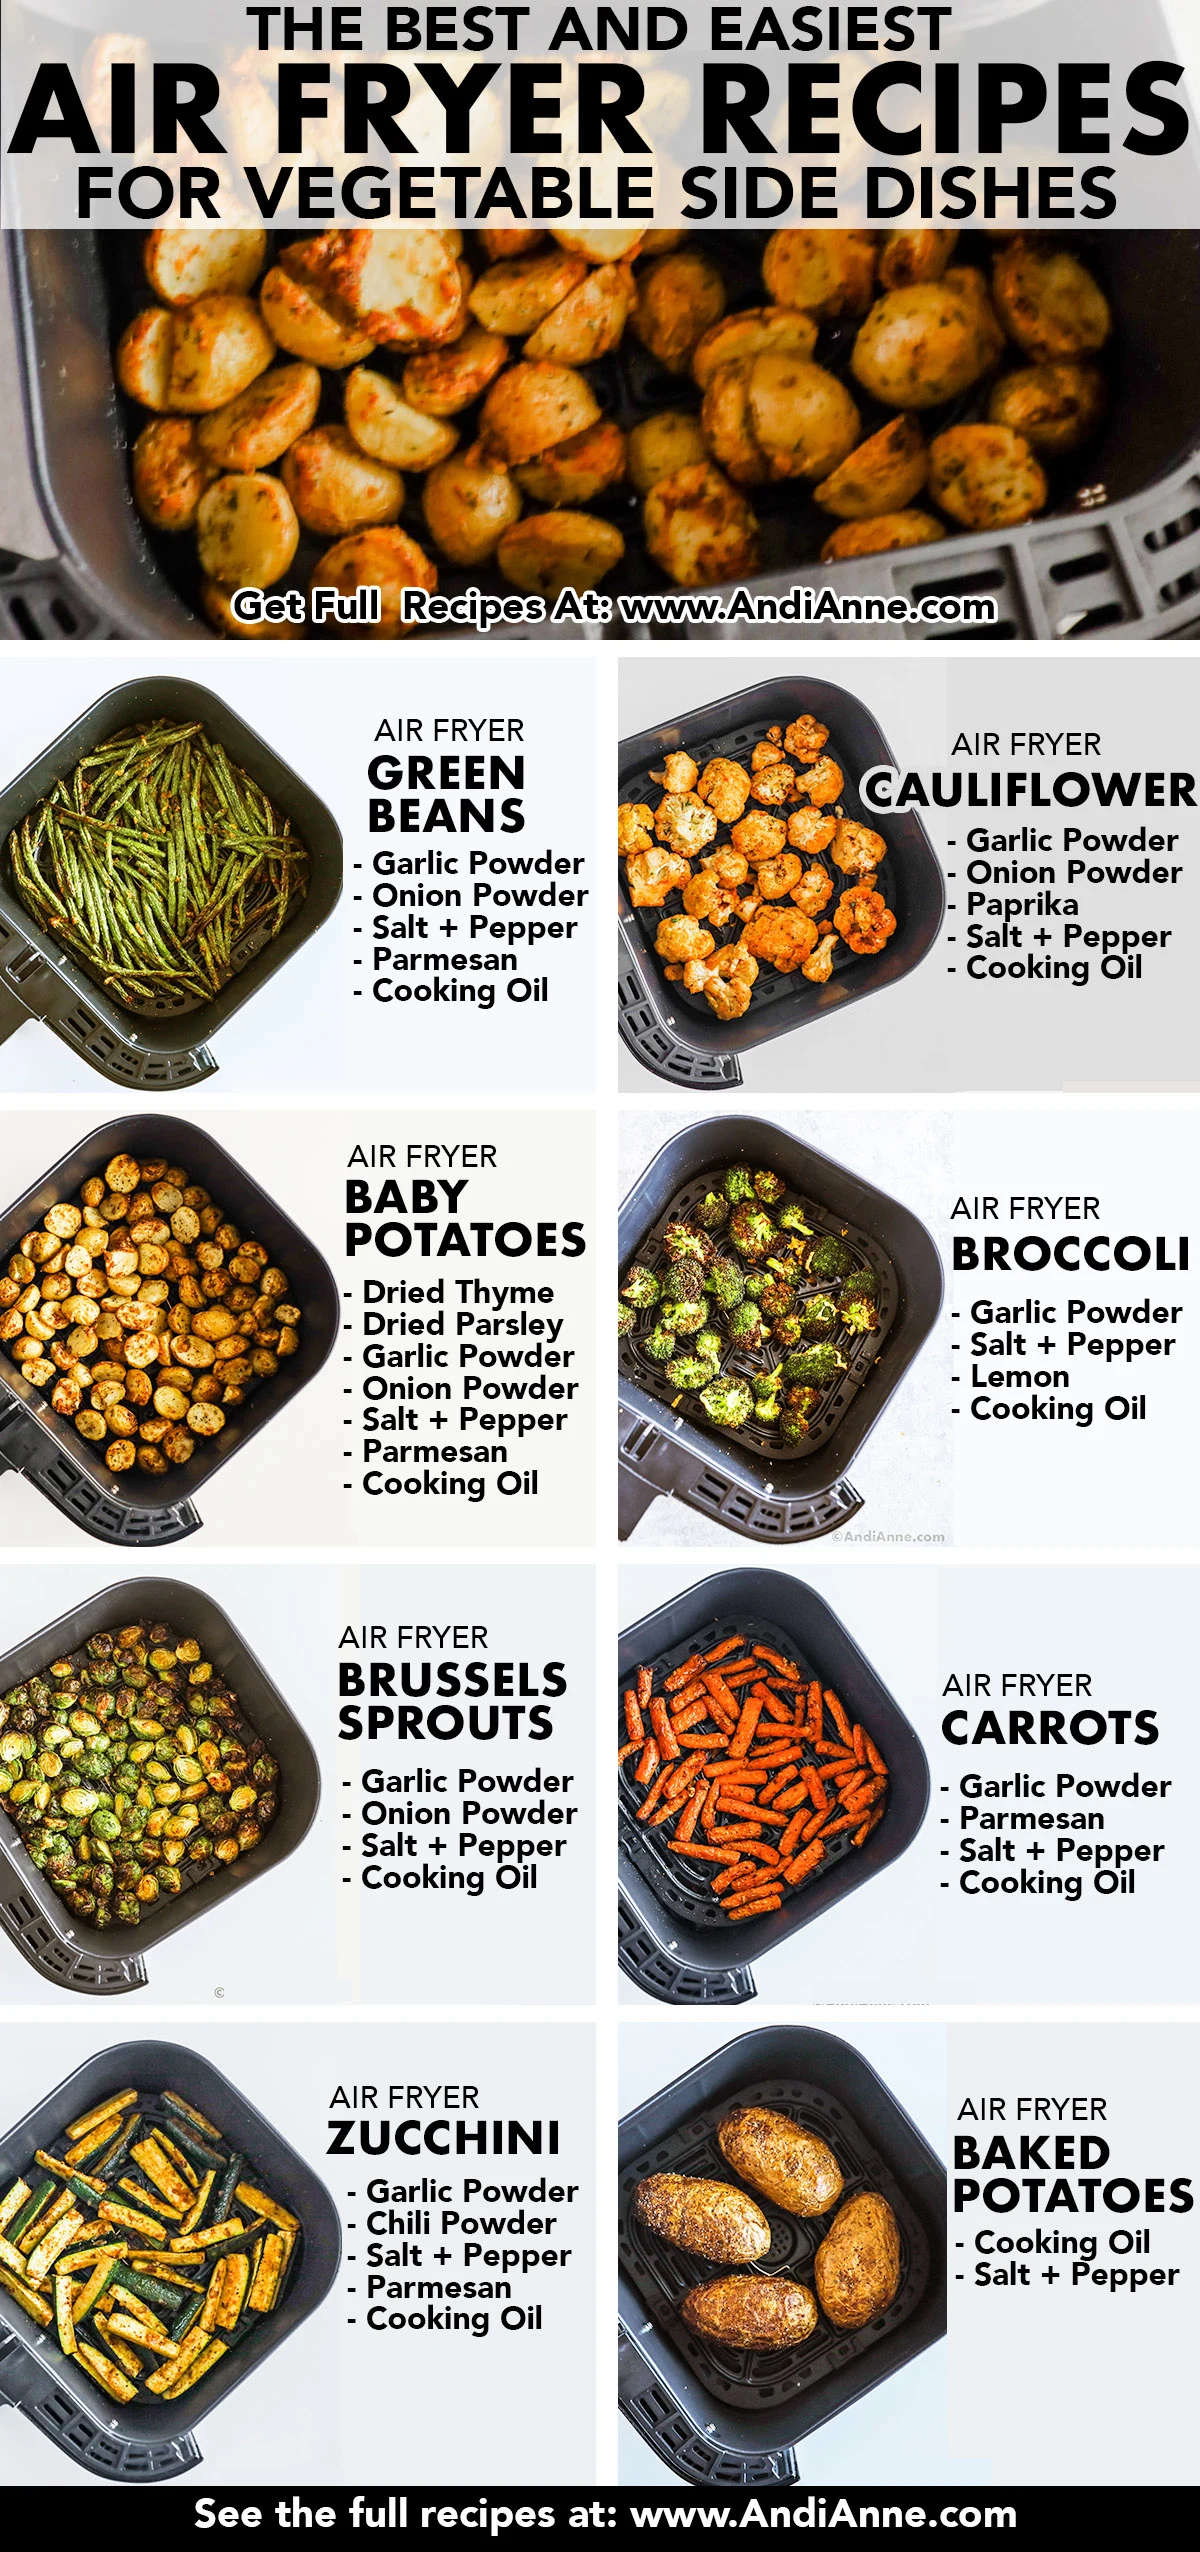 An image of 8 different vegetables, all cooked and in air fryer baskets with a list of ingredients beside the image that's needed for each one. Vegetables include green beans, cauliflower, baby potatoes, broccoli, brussels sprouts, carrots, zucchini and baked potatoes.